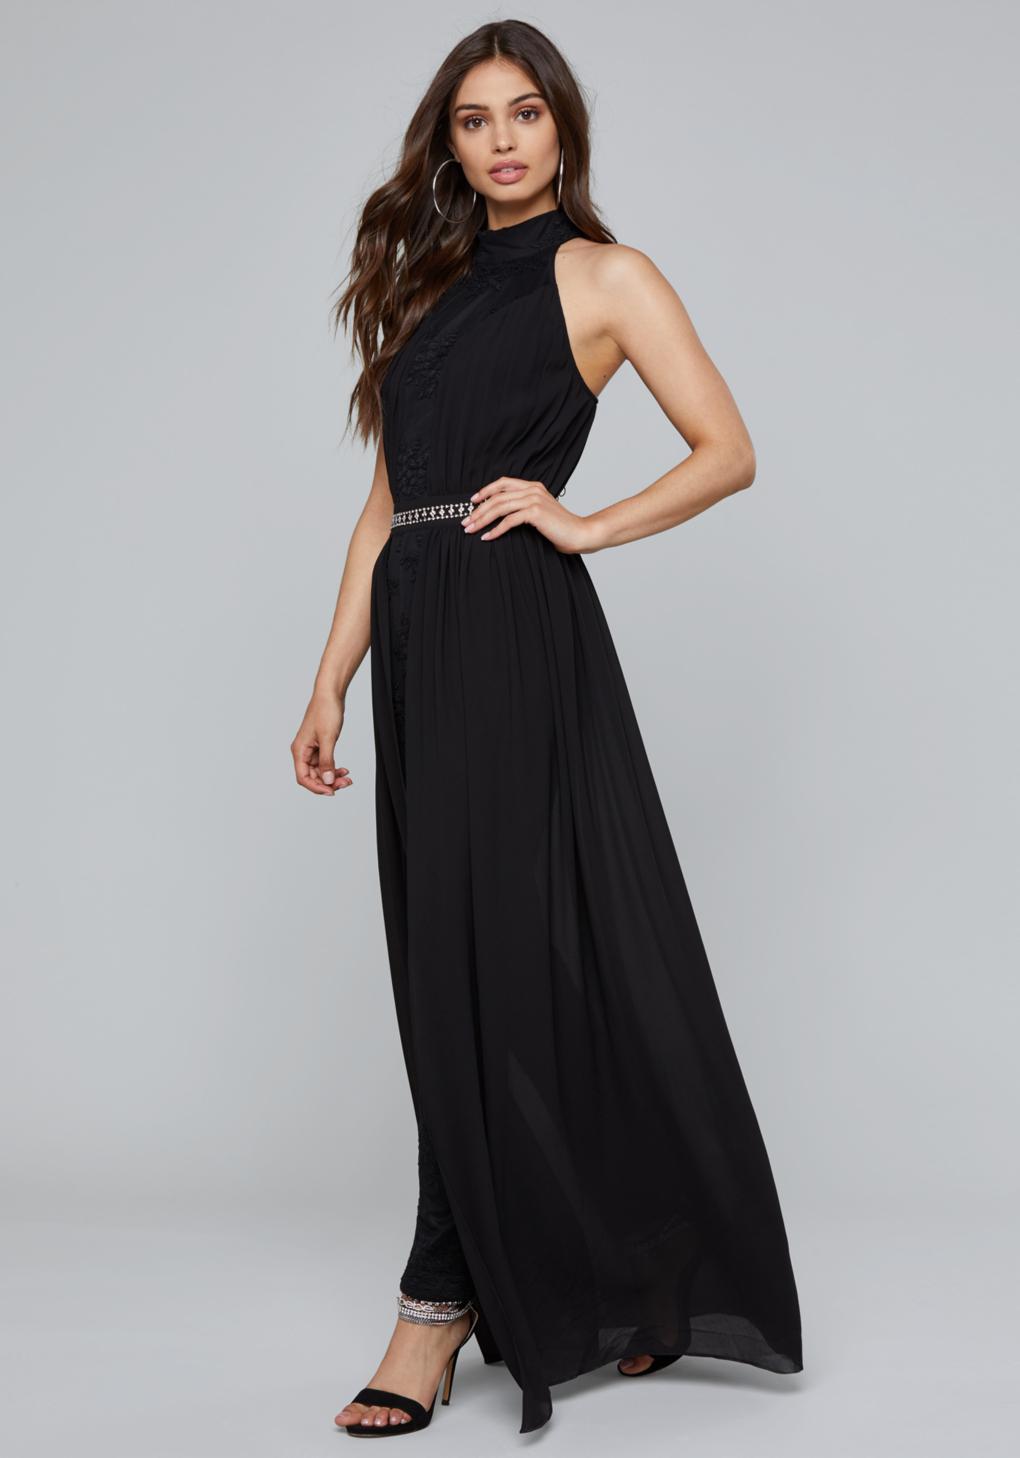 Bebe Synthetic Skirt Overlay Jumpsuit in Black - Lyst